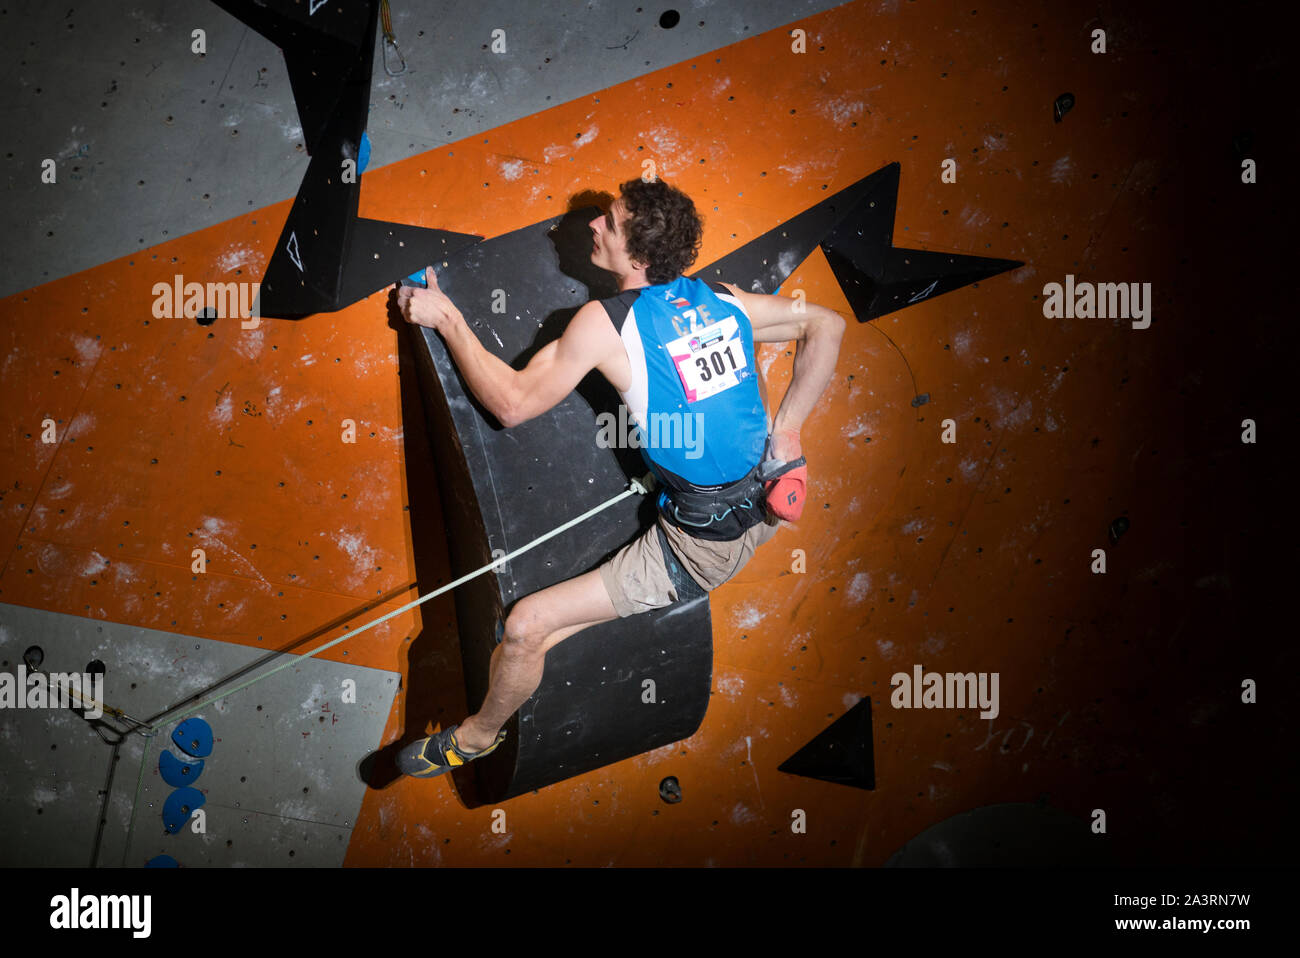 Adam Ondra of the Czech Republic wins the Lead during Combined Men's Final on at the IFSC Climbing World Championships at the Edinburgh International Stock Photo